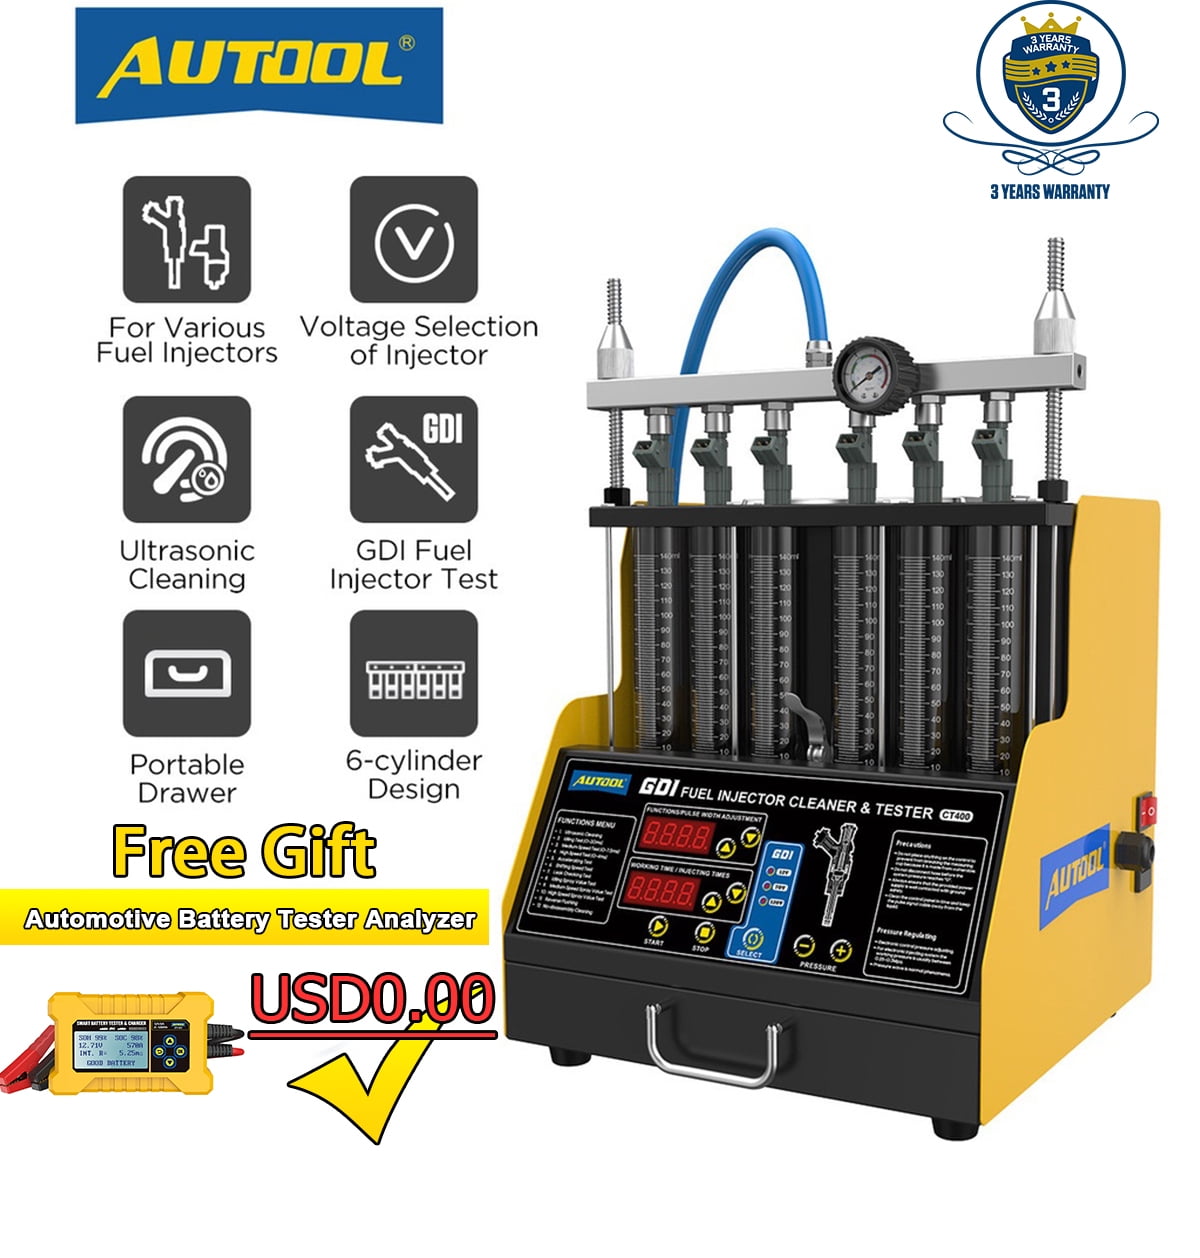 AUTOOL Automobile GDI Fuel Injector Cleaner Machine, 6 Cylinders